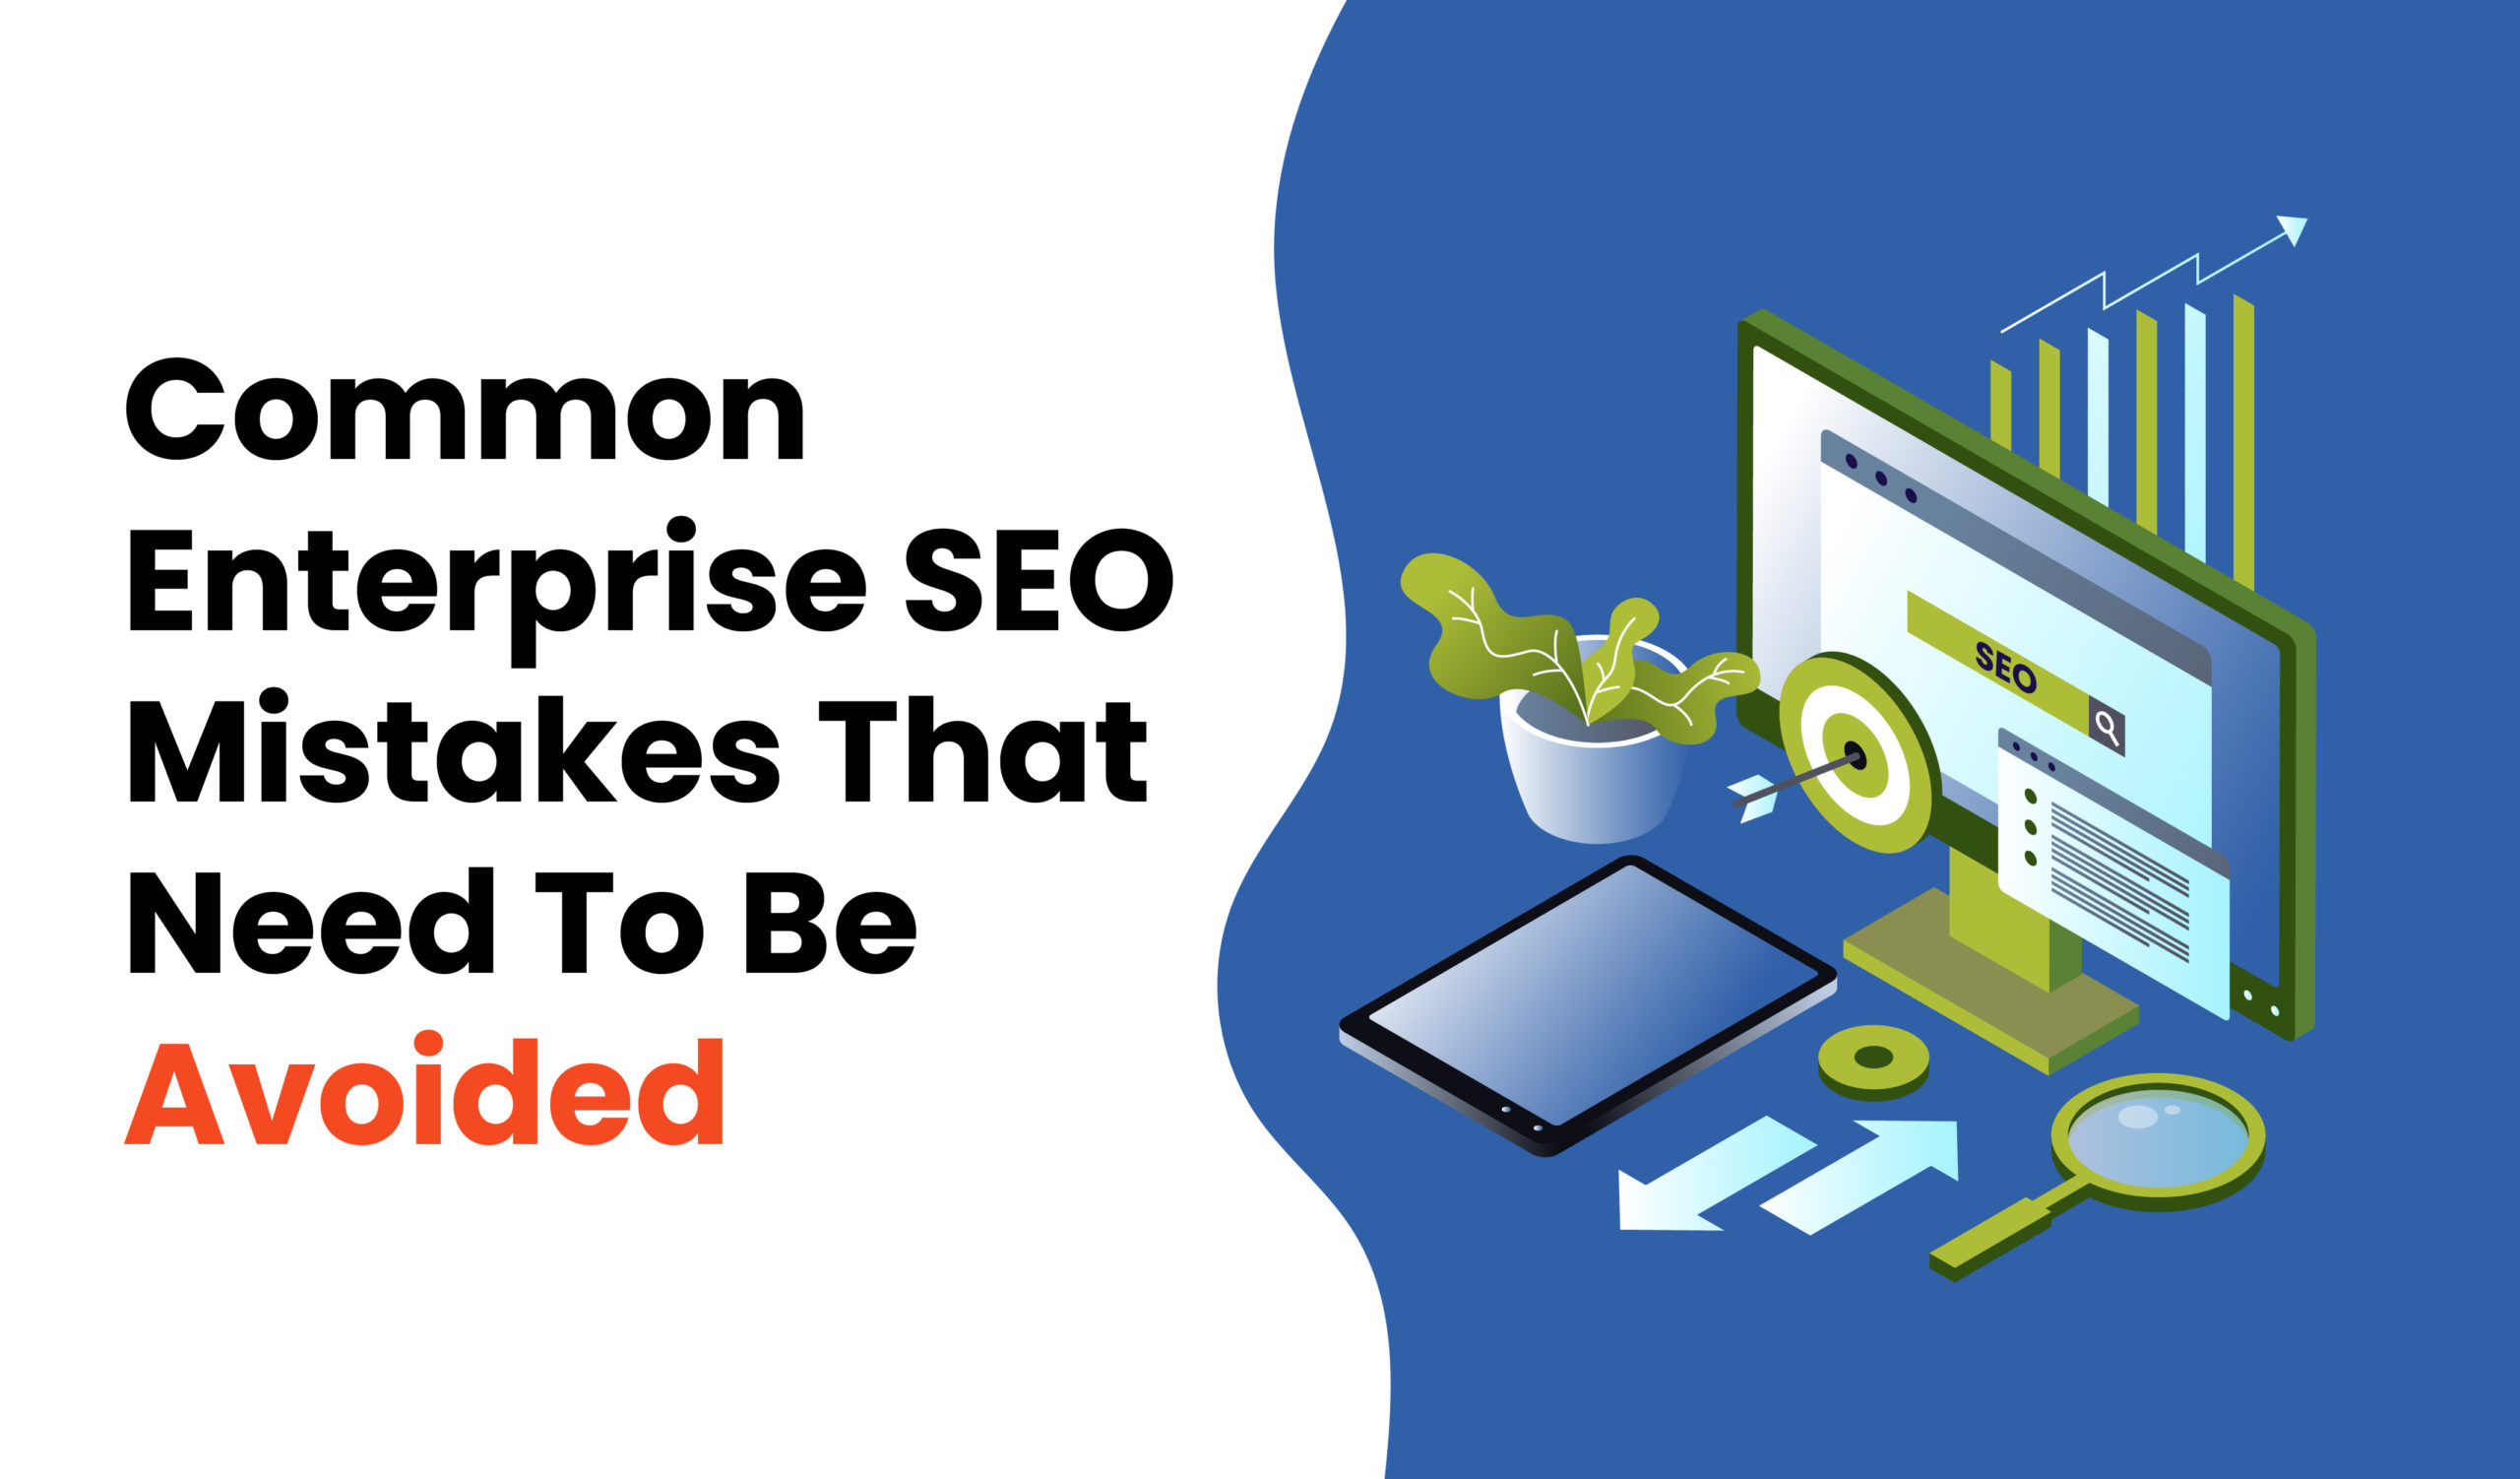 Common Enterprise SEO mistakes that need to be avoided